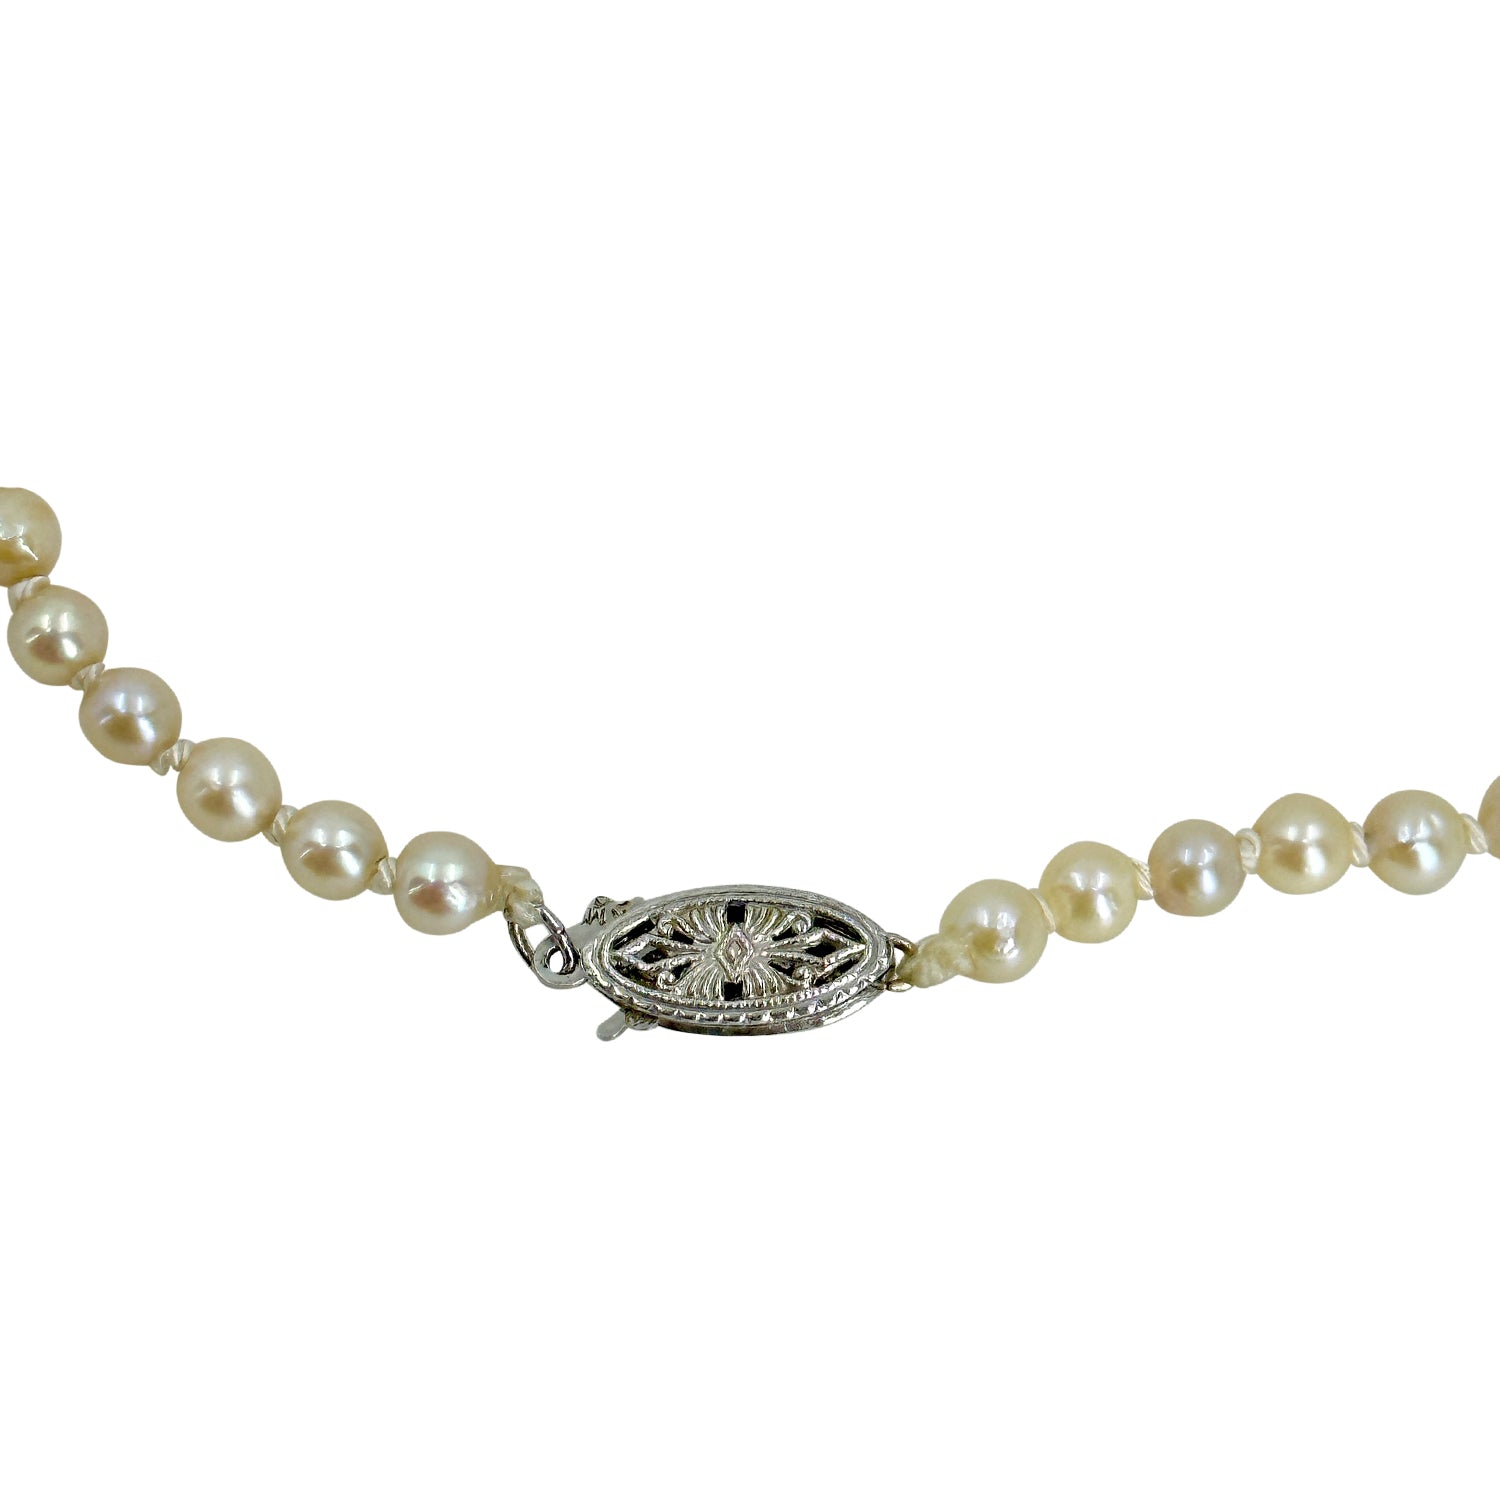 Petite Retro Japanese Saltwater Cultured Akoya Pearl Vintage Necklace - 10K White Gold 16.25 Inch